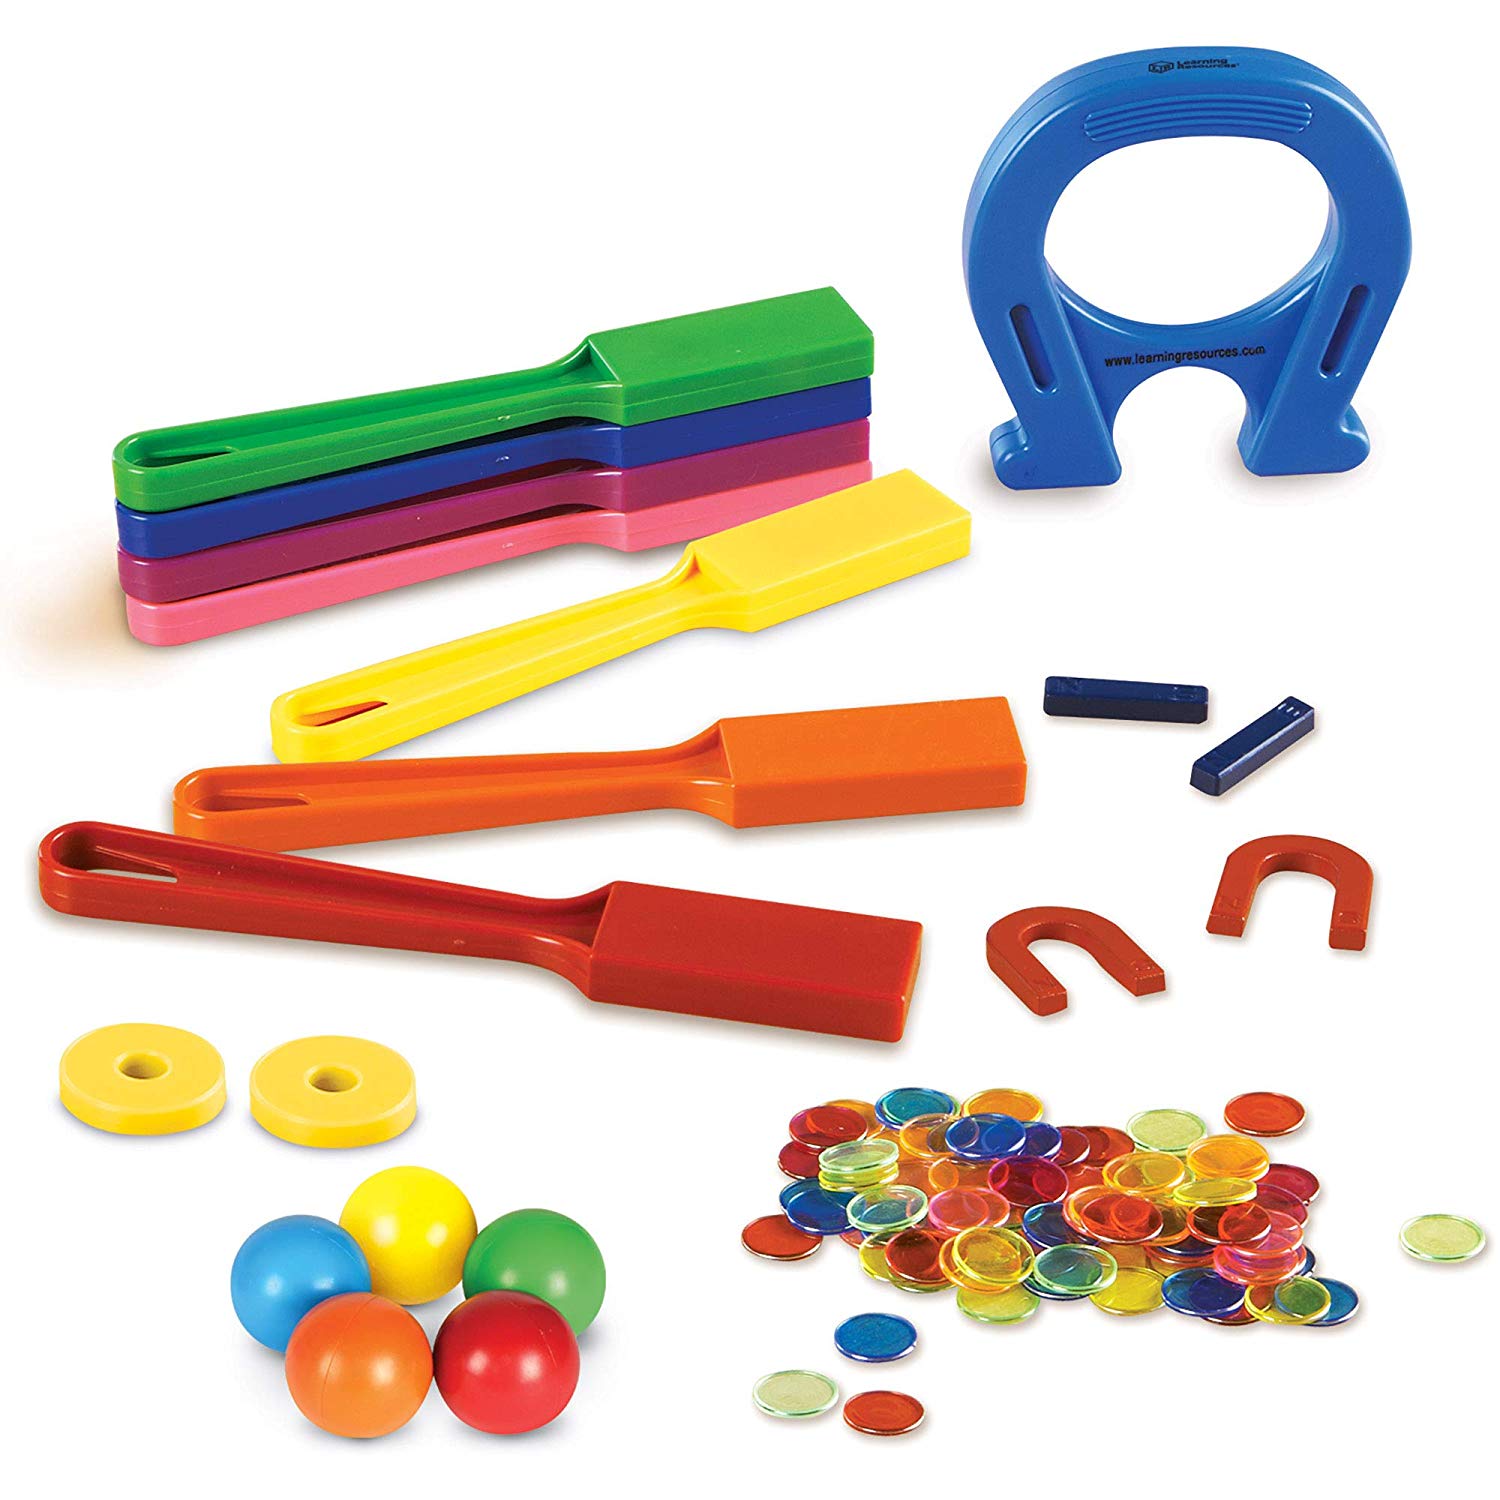 Magnets Stem Kit with multicolor magnets. 